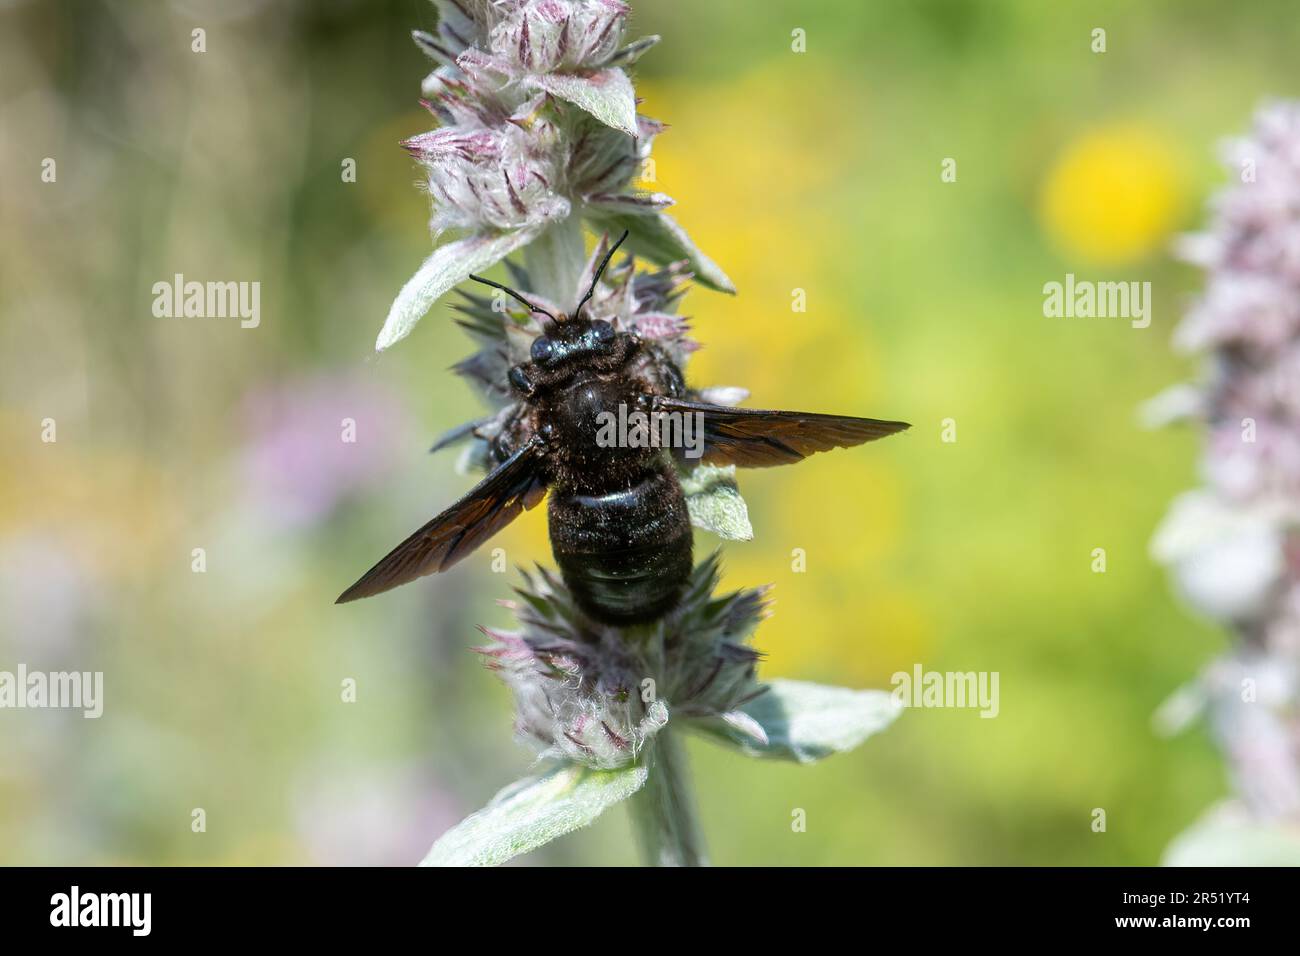 A large carpenter bee species nectaring on a wildflower in Central Italy, Europe Stock Photo